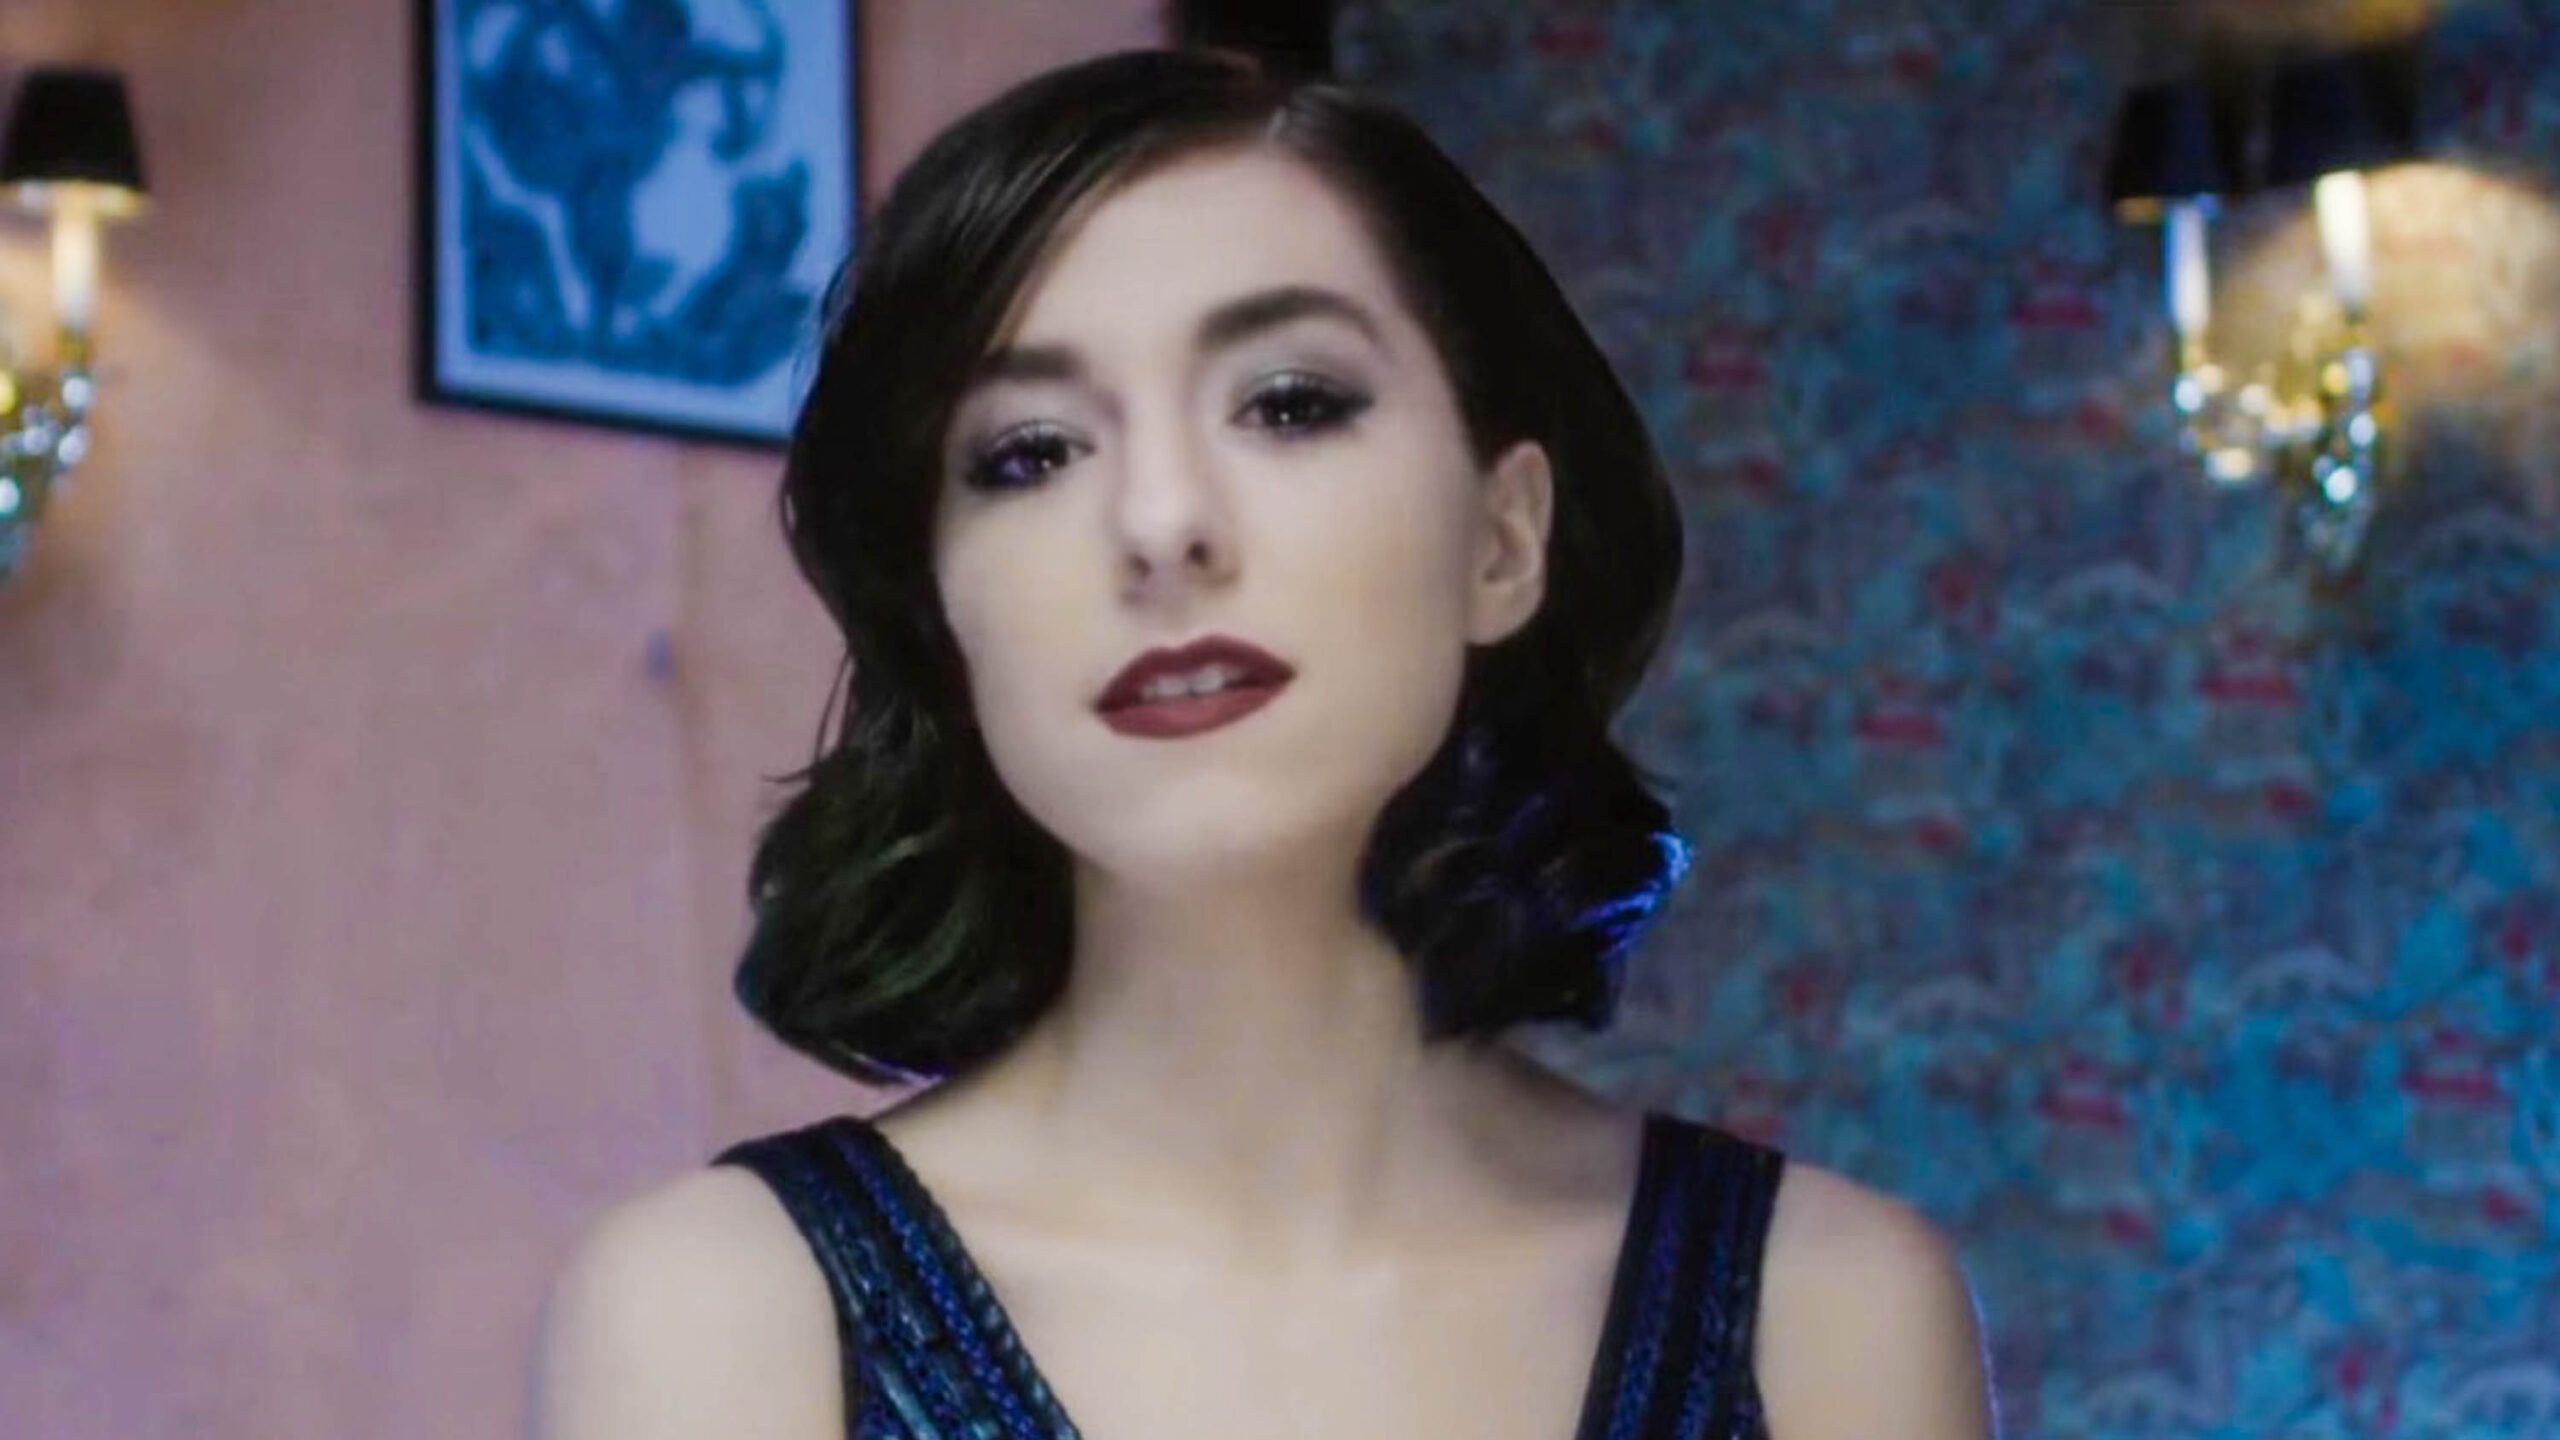 WATCH: Christina Grimmie’s team releases first music video after her death